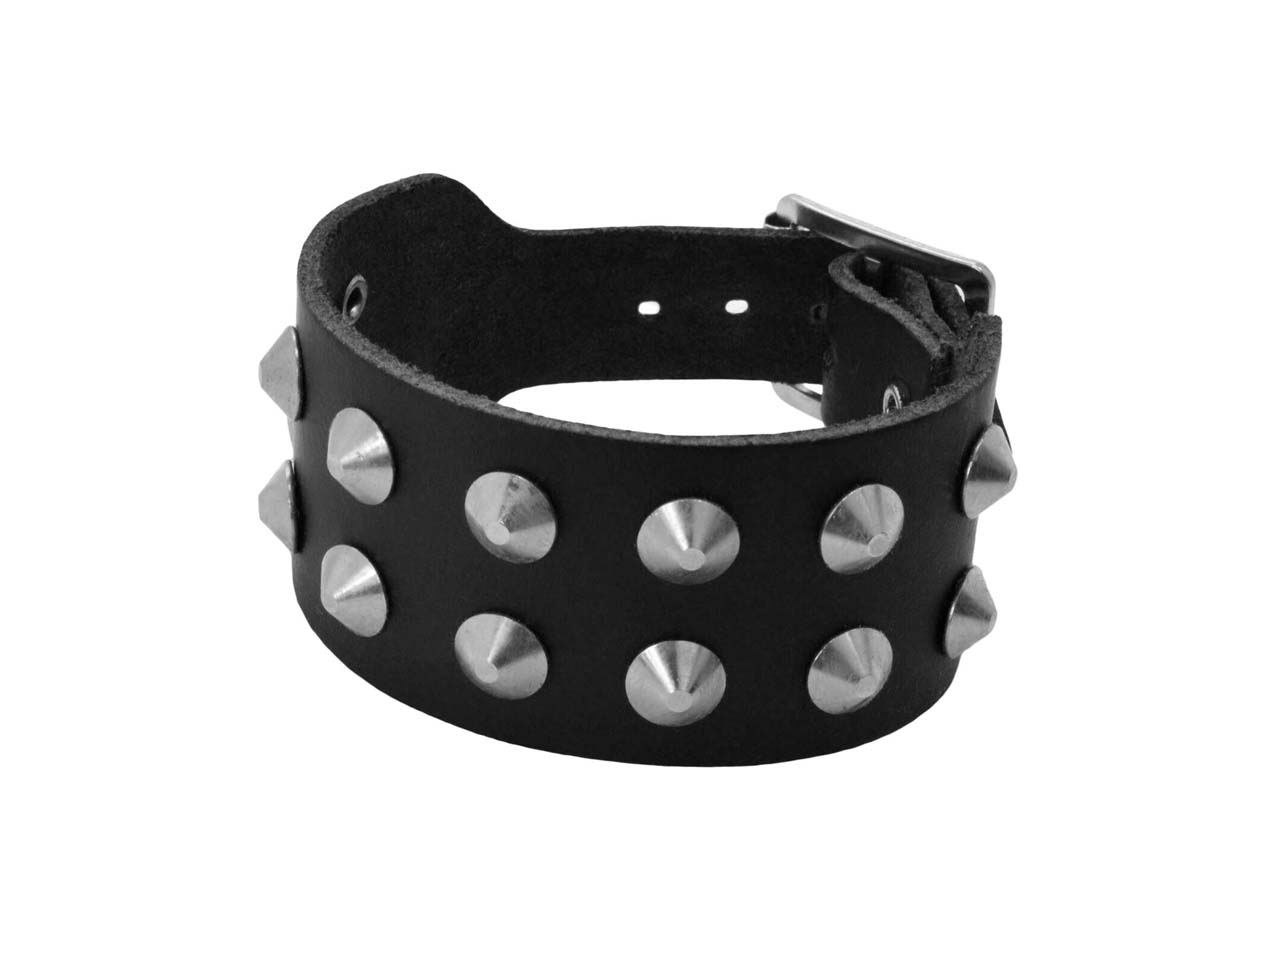 2 Row Conical Studded Leather Choker